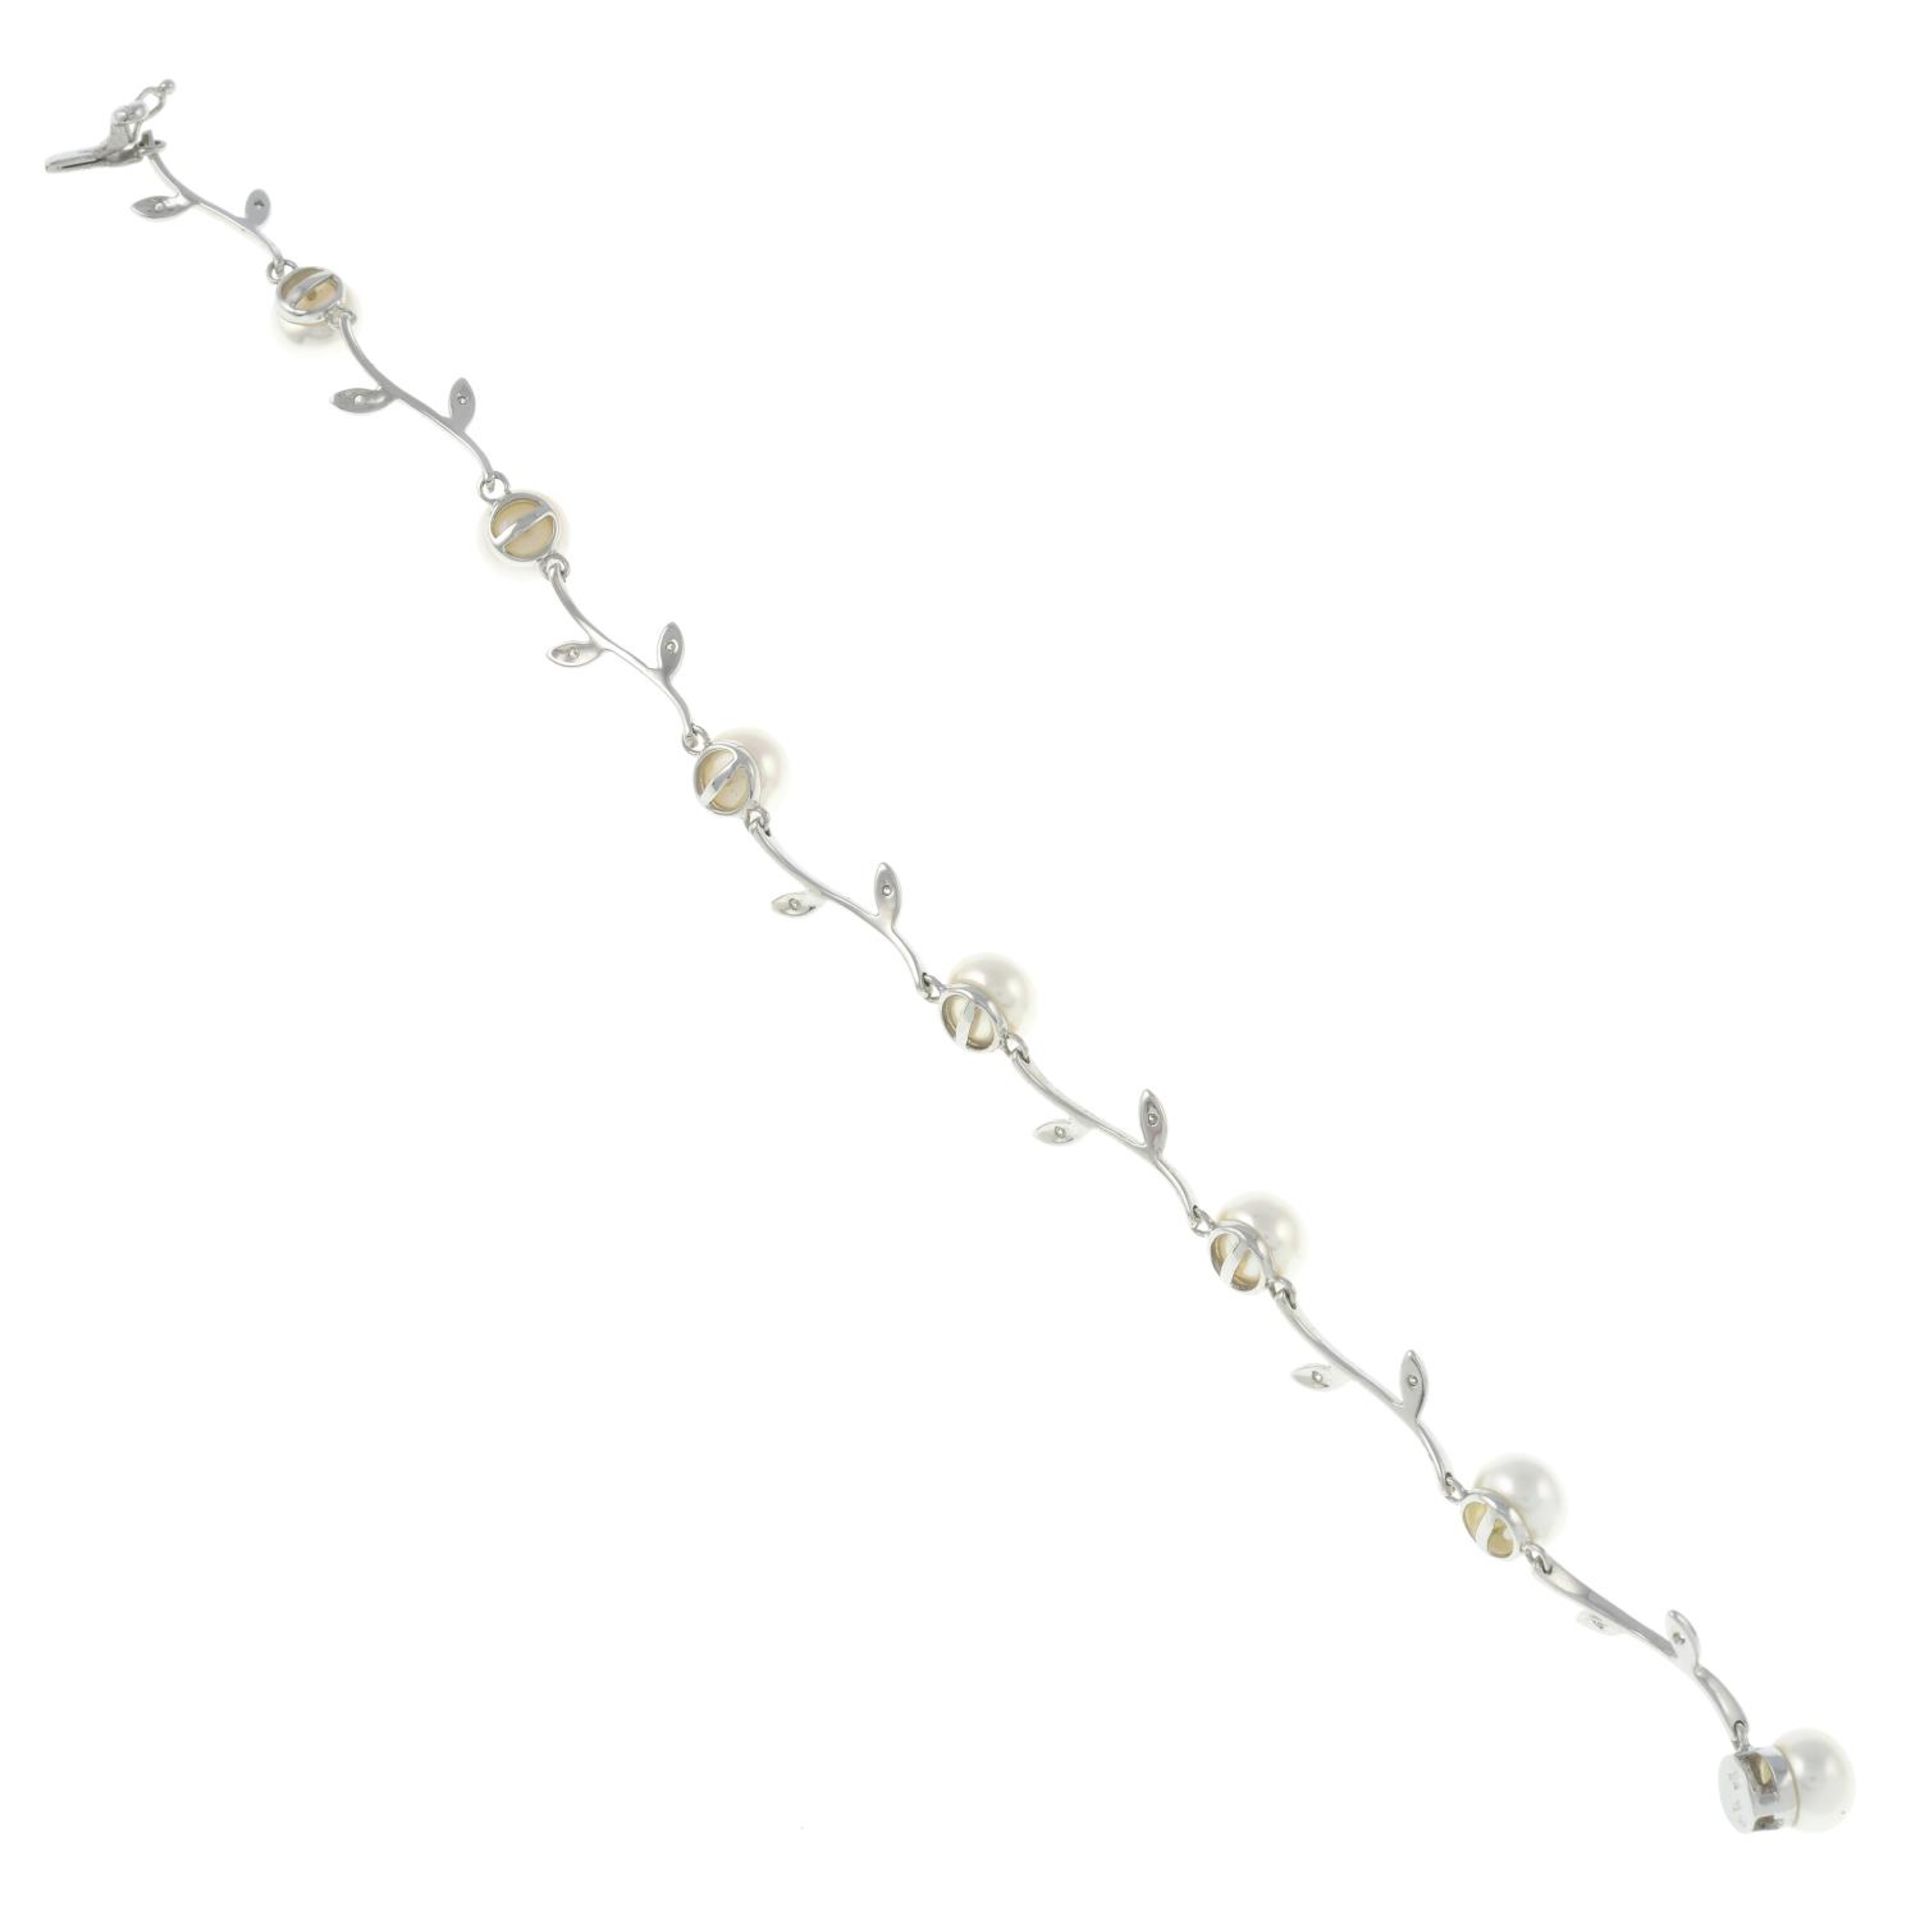 A 9ct gold cultured pearl and diamond floral bracelet.Hallmarks for 9ct gold.Length 17.3cms. - Image 2 of 2